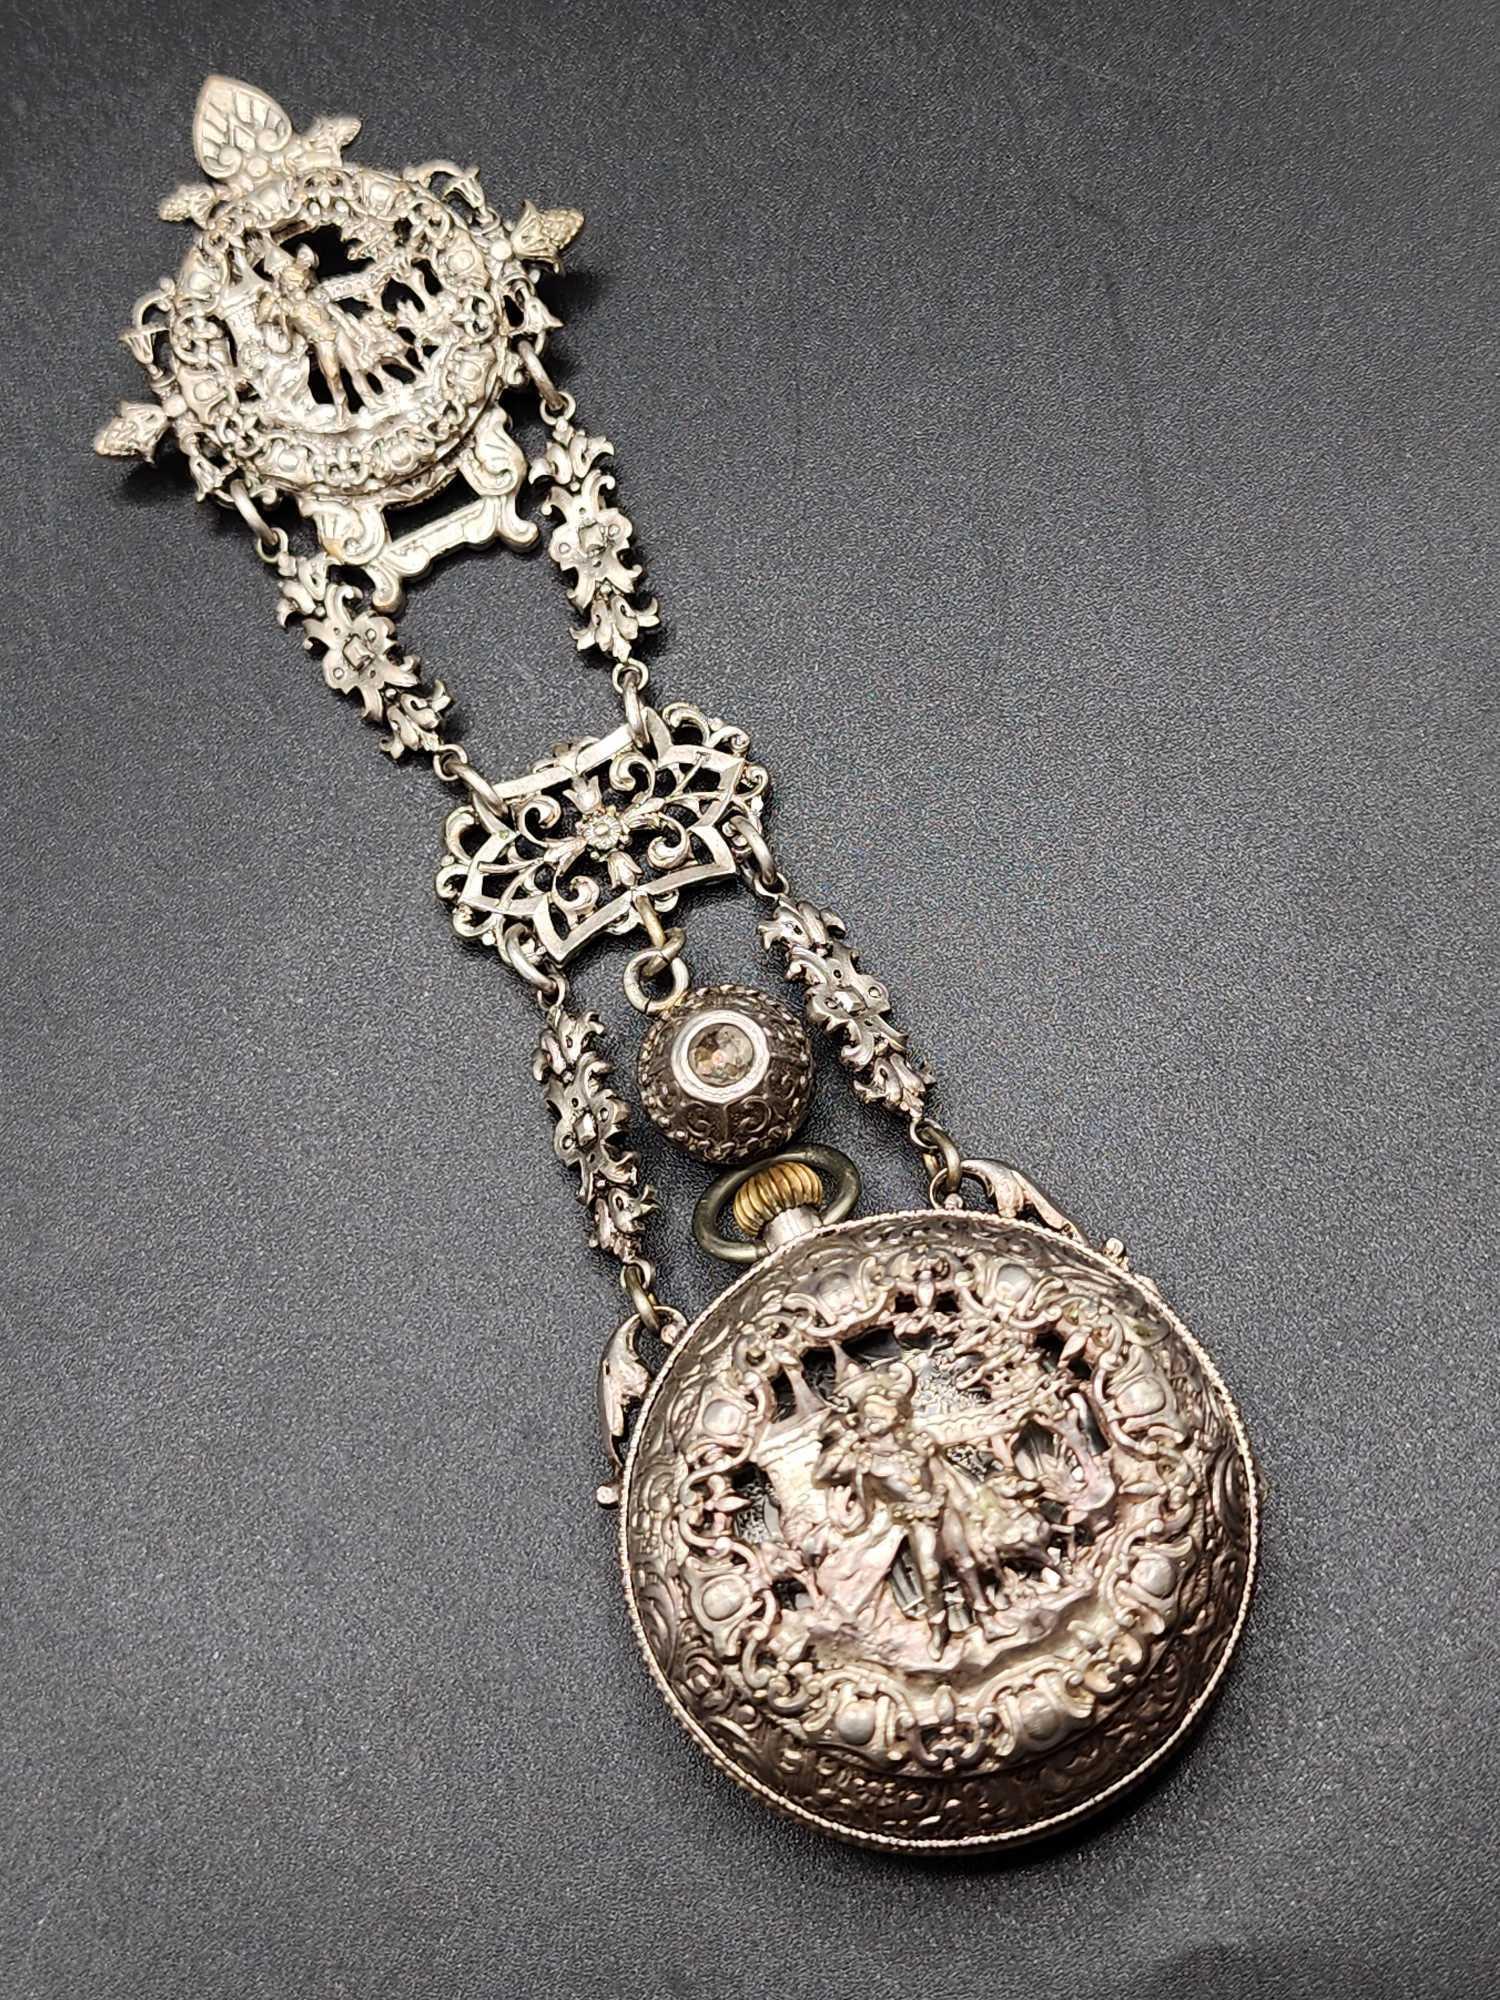 Rarely found antique pocket watch with chatelaine case, pin